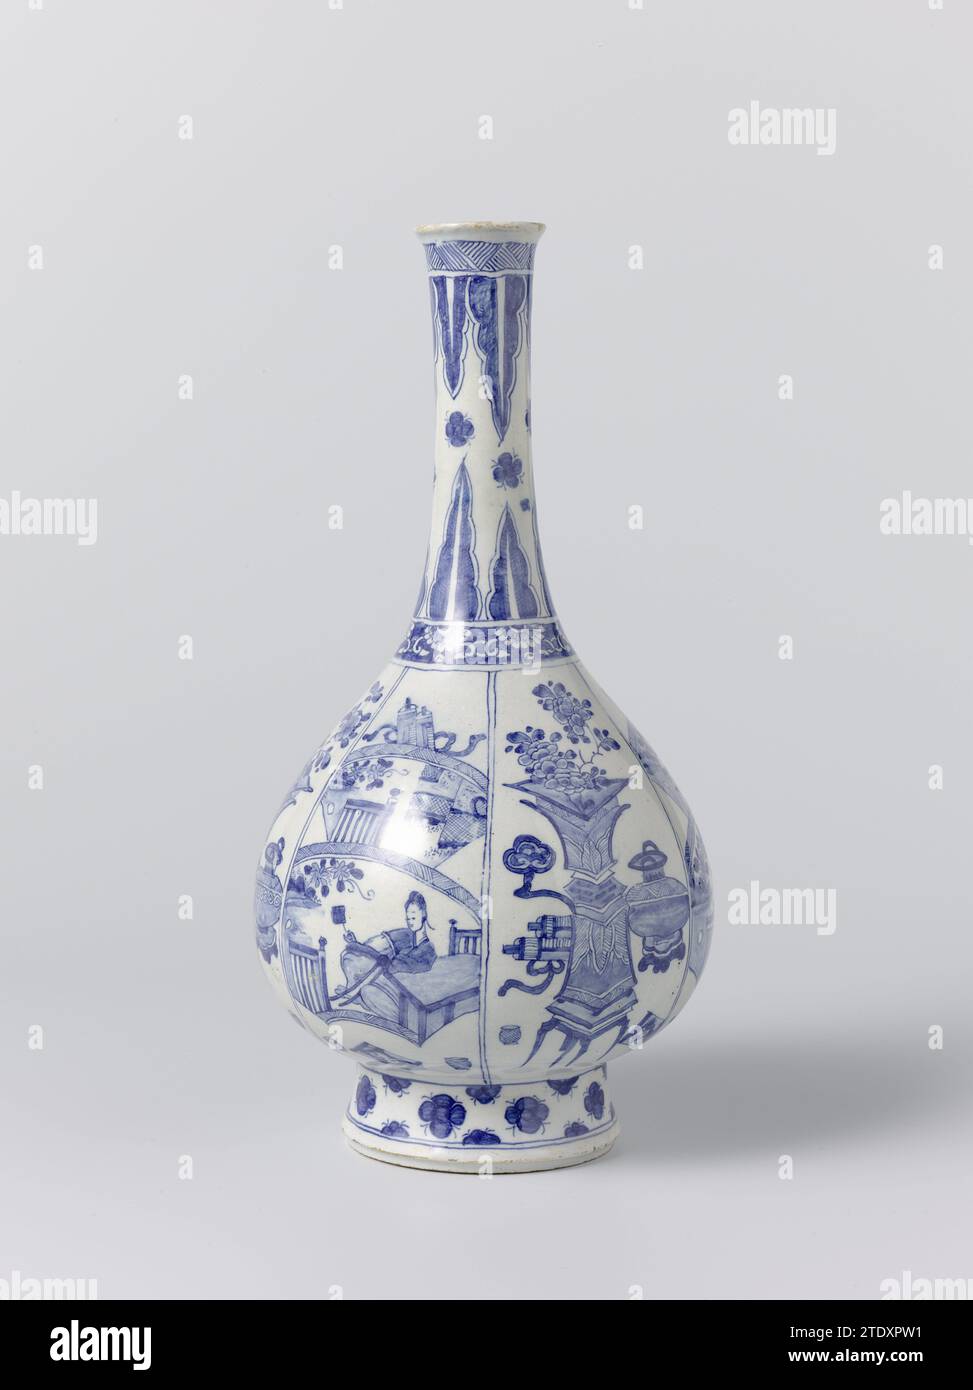 Vase, the Greek A, c. 1722 - c. 1757 Vase van Faience after the example of the Chinese porcelain from the Kangxi period. Delft . Vase van Faience after the example of the Chinese porcelain from the Kangxi period. Delft . Stock Photo